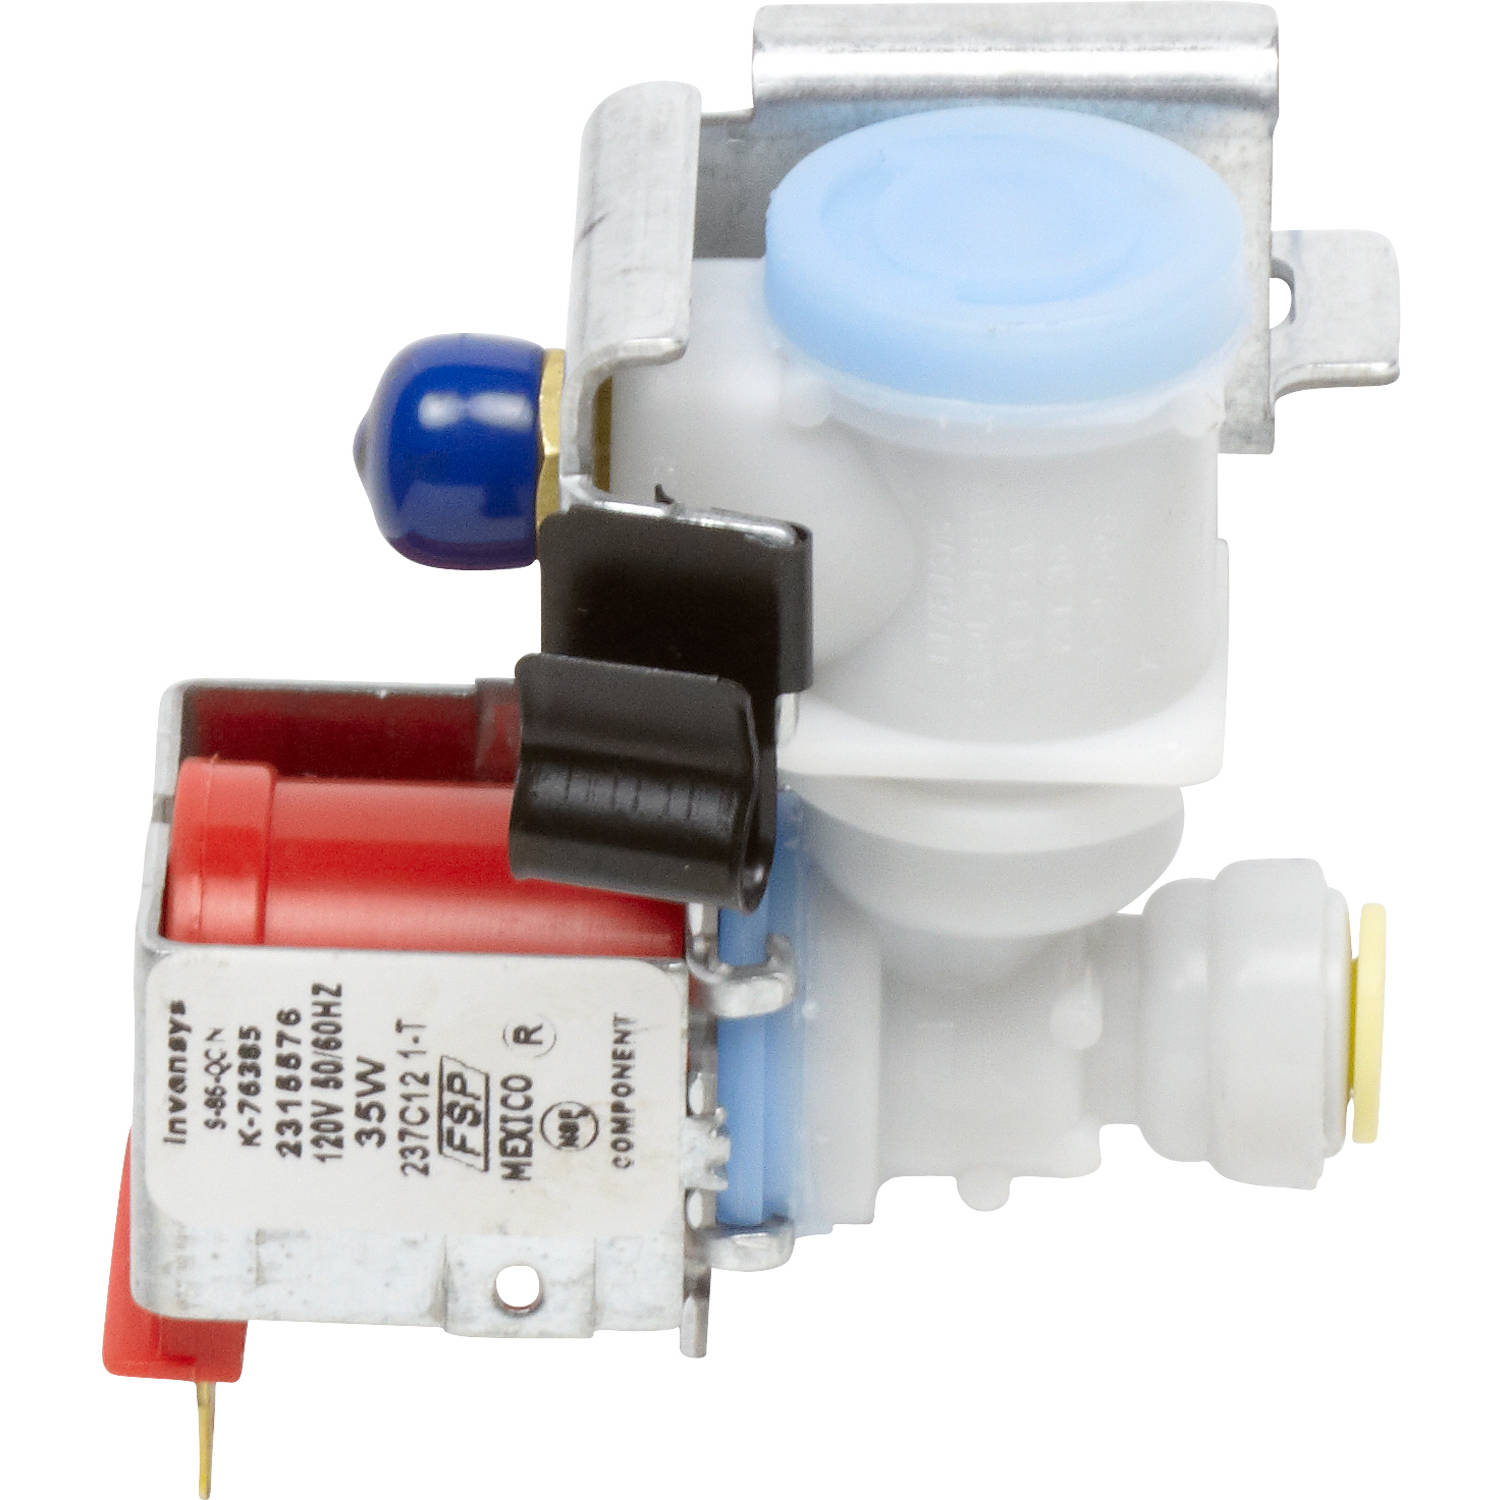 Whirlpool 2315576 Valve-Inlet - image 1 of 5